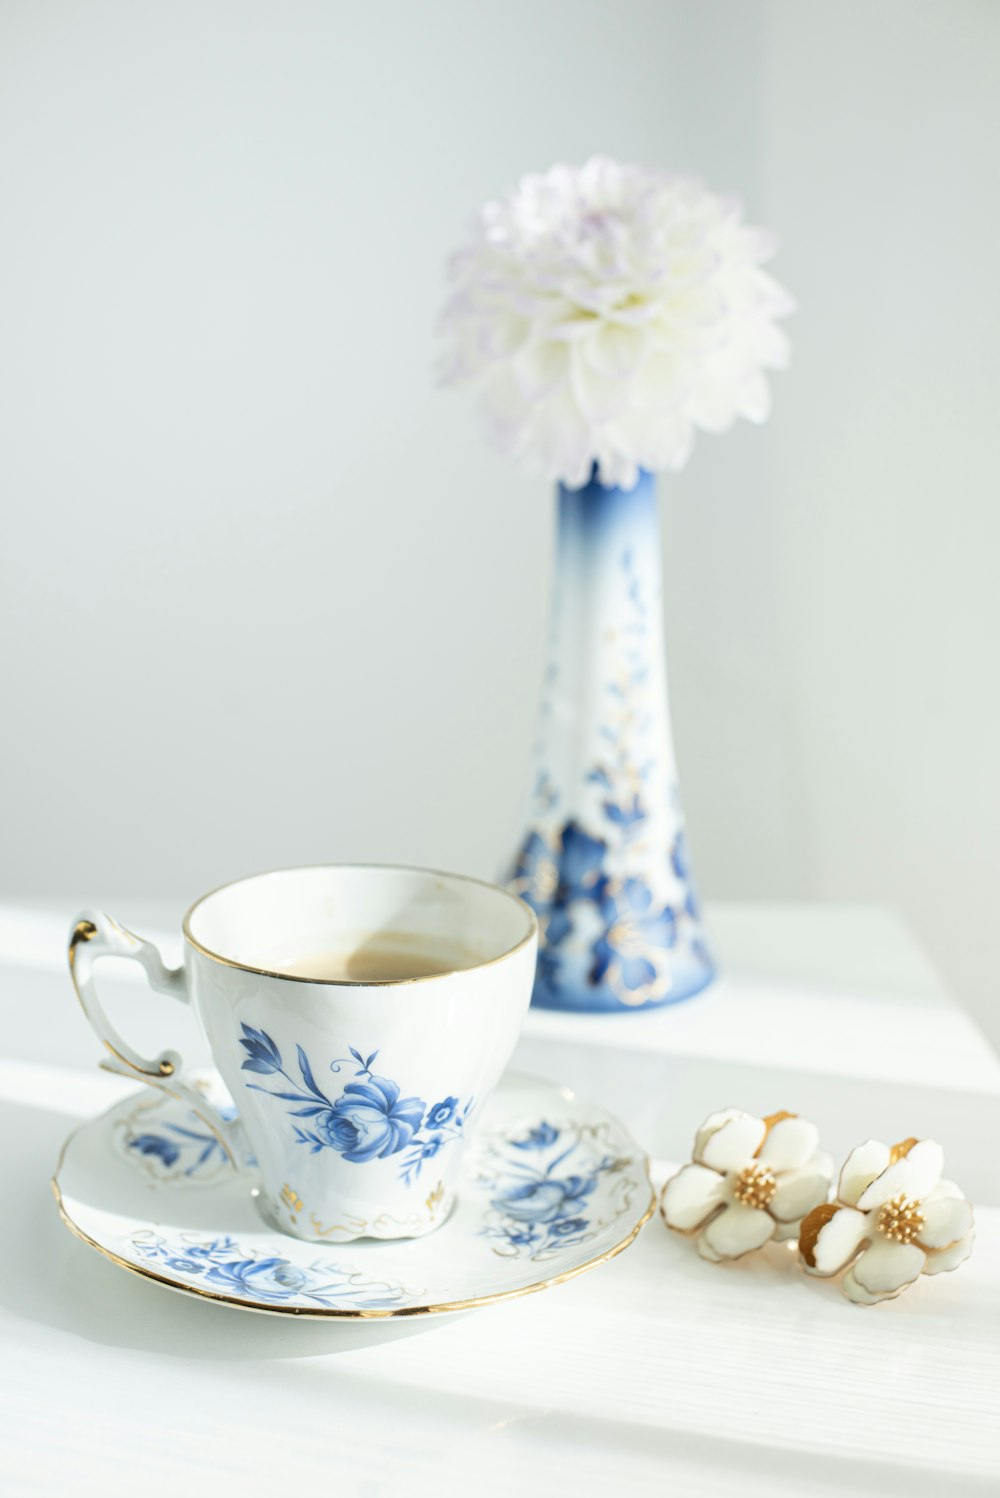 white and blue floral ceramic teacup on saucer